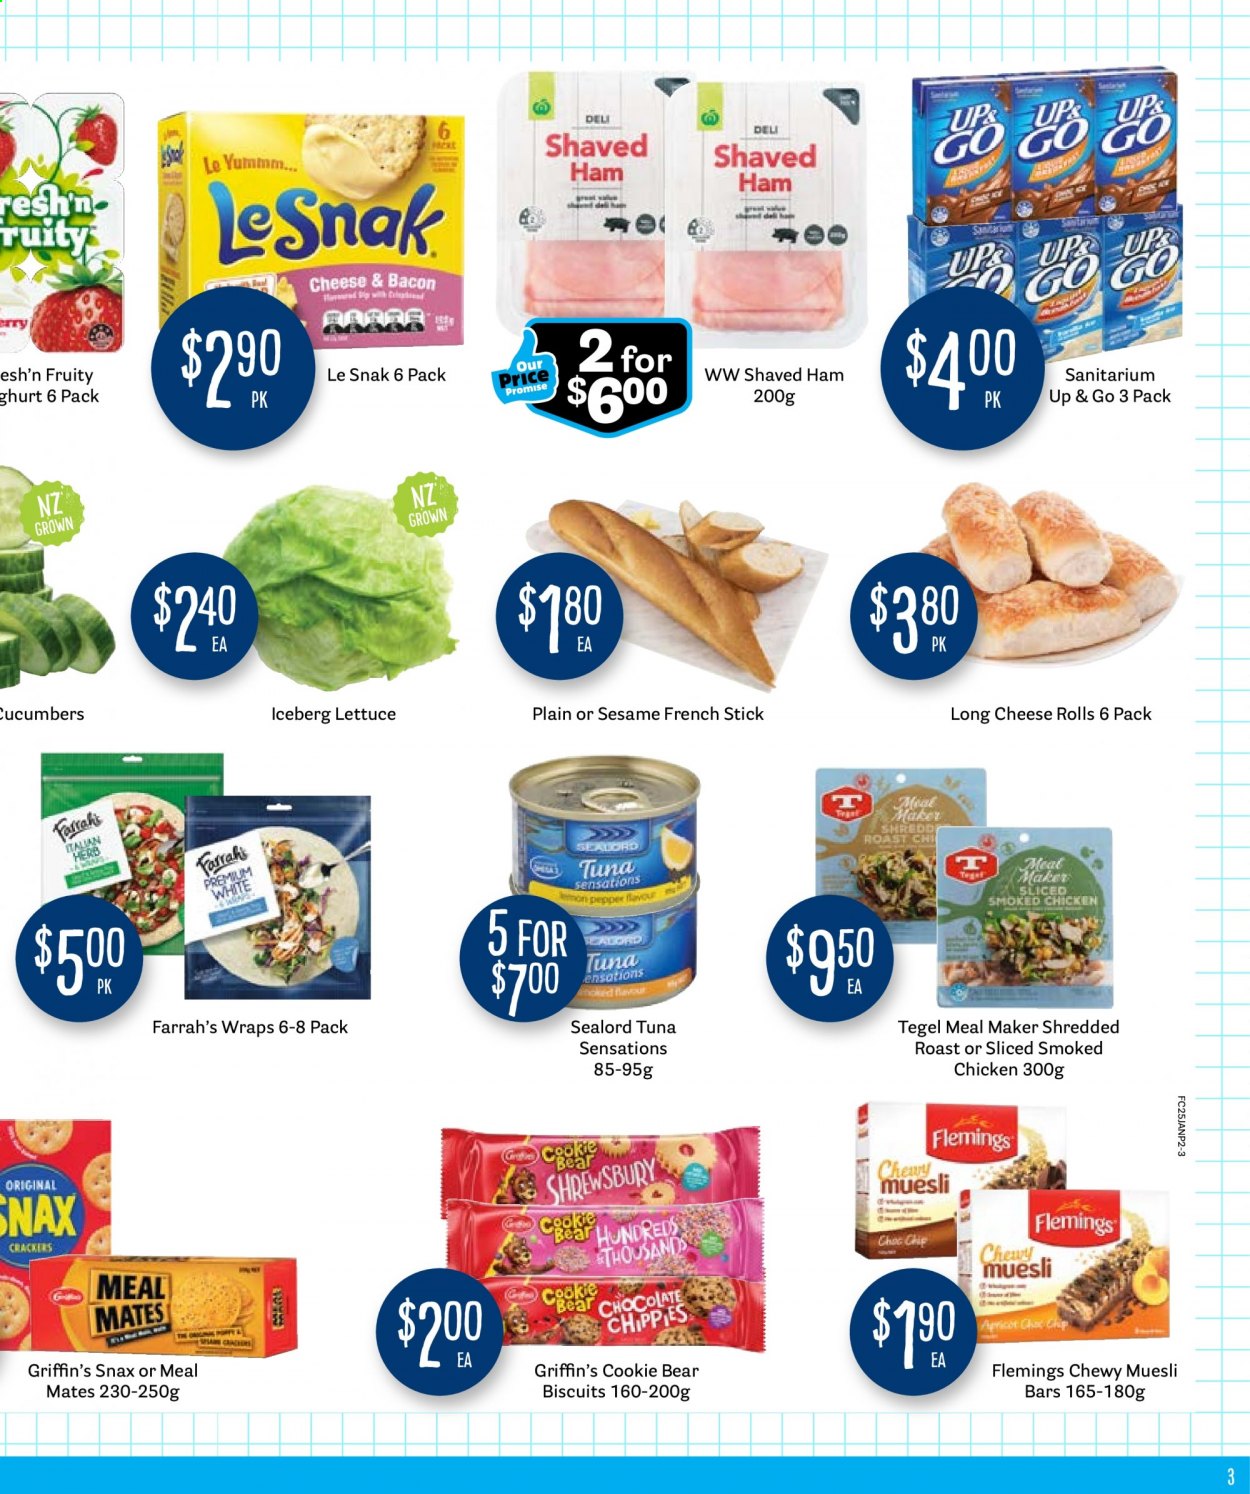 thumbnail - Fresh Choice mailer - 25.01.2021 - 31.01.2021 - Sales products - lettuce, tuna, Sealord, bacon, ham, chocolate, crackers, biscuit, Griffin's, Le Snak, cucumber, sealord tuna, muesli bar, muesli, pepper, herbs. Page 3.